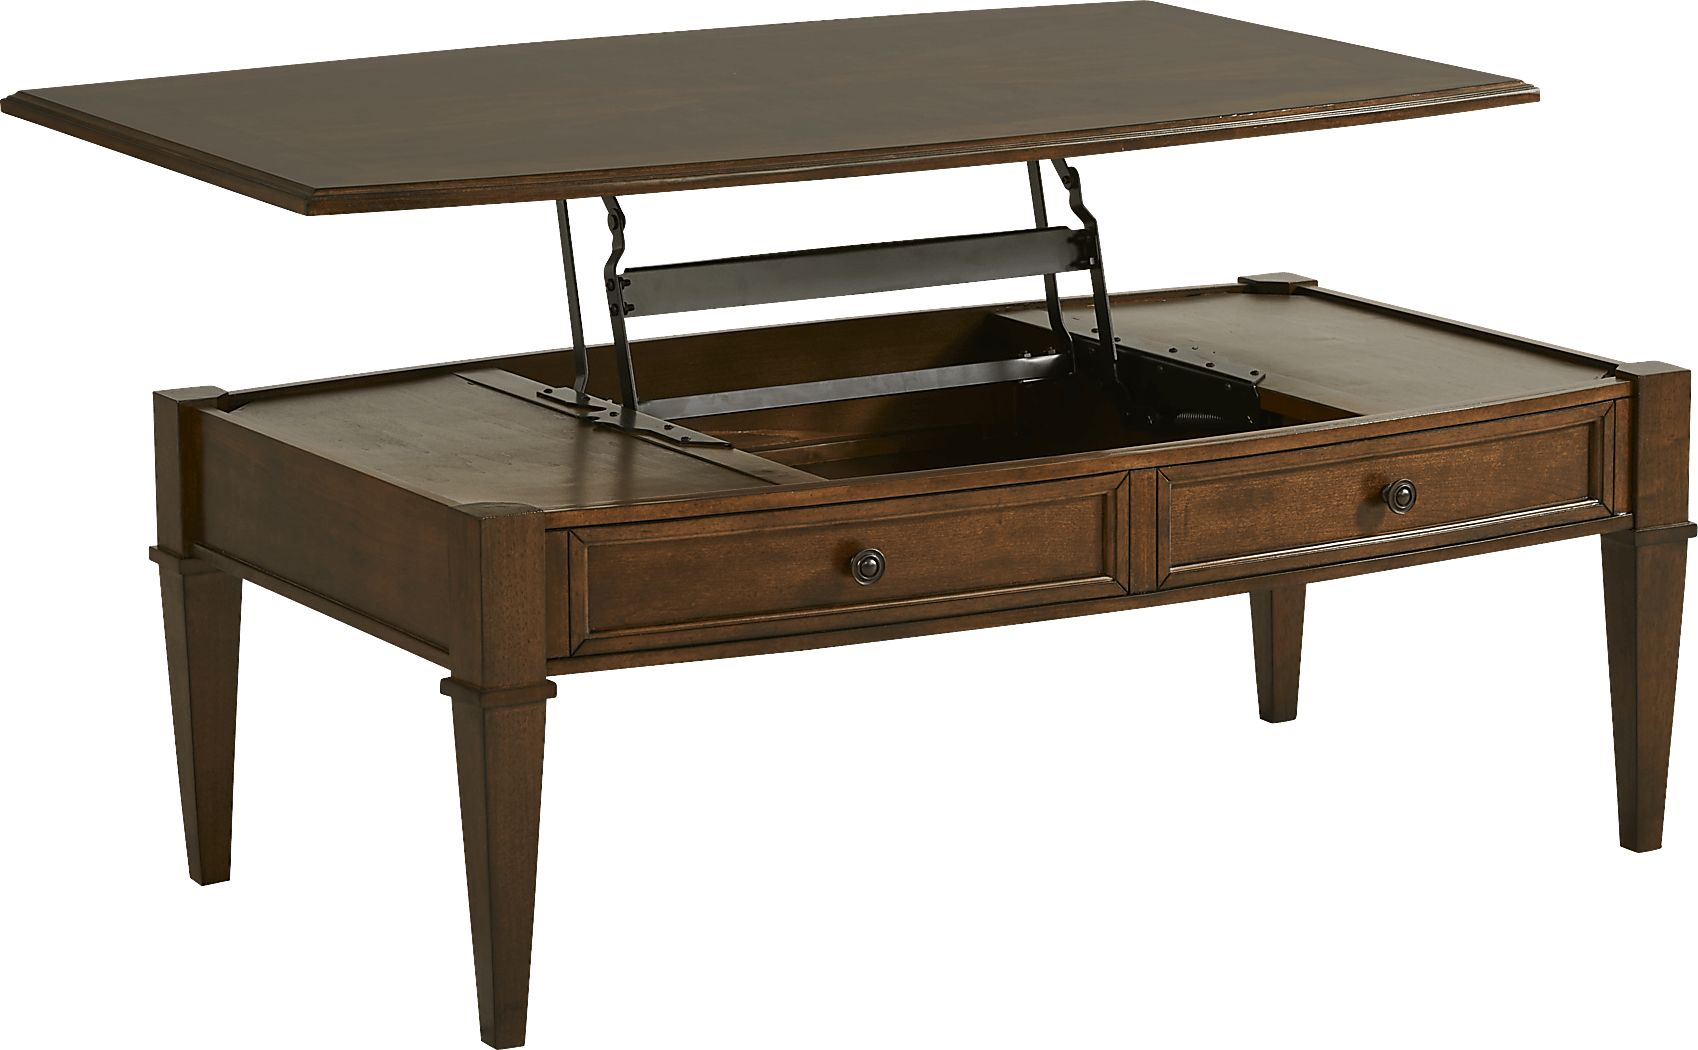 Russo Lane Brown Storage Cocktail Table